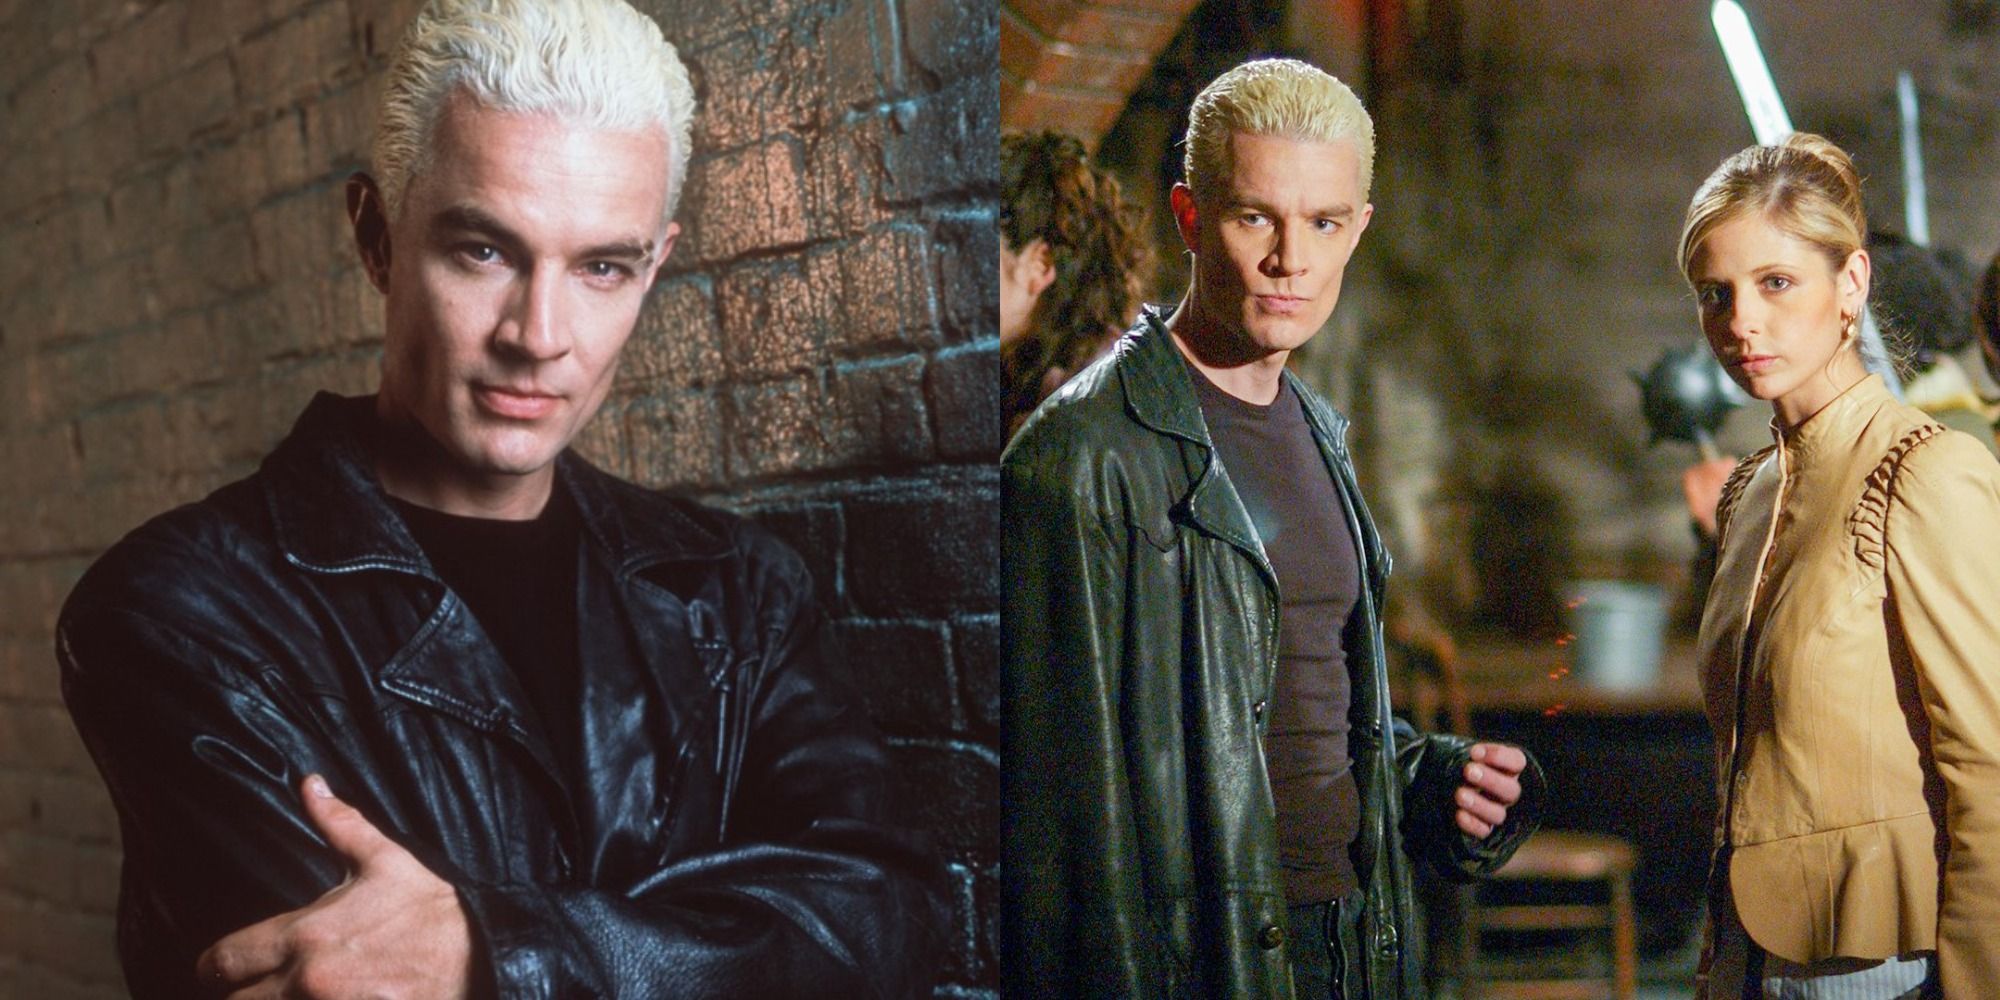 Buffy The Vampire Slayer: 10 Things About Spike That Have Aged Poorly